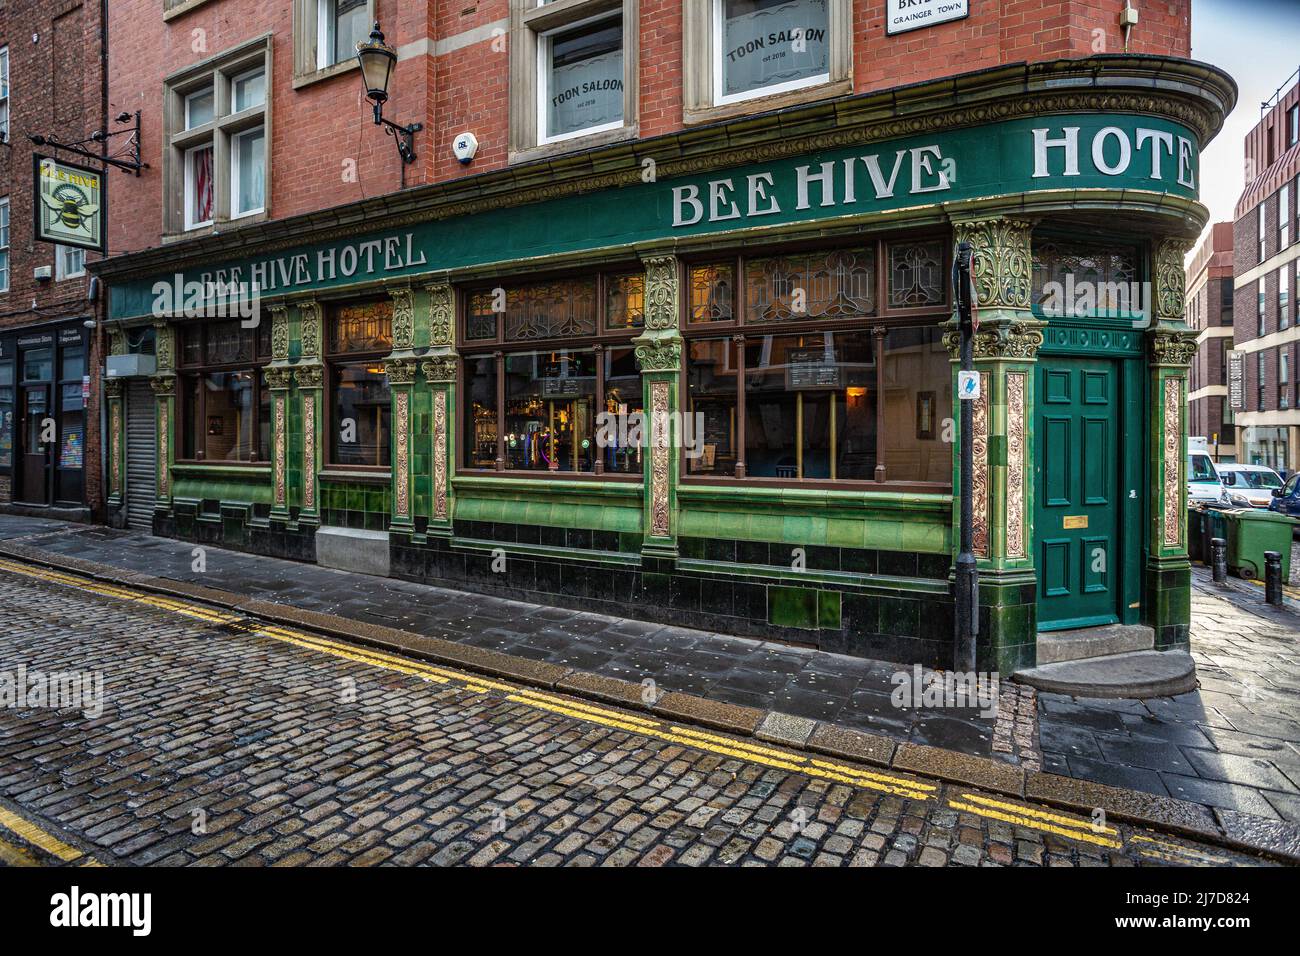 The Beehive Hotel public house exterior is faced with green and yellow glazed tiles . High Bridge , Newcastle upon Tyne, England. Stock Photo